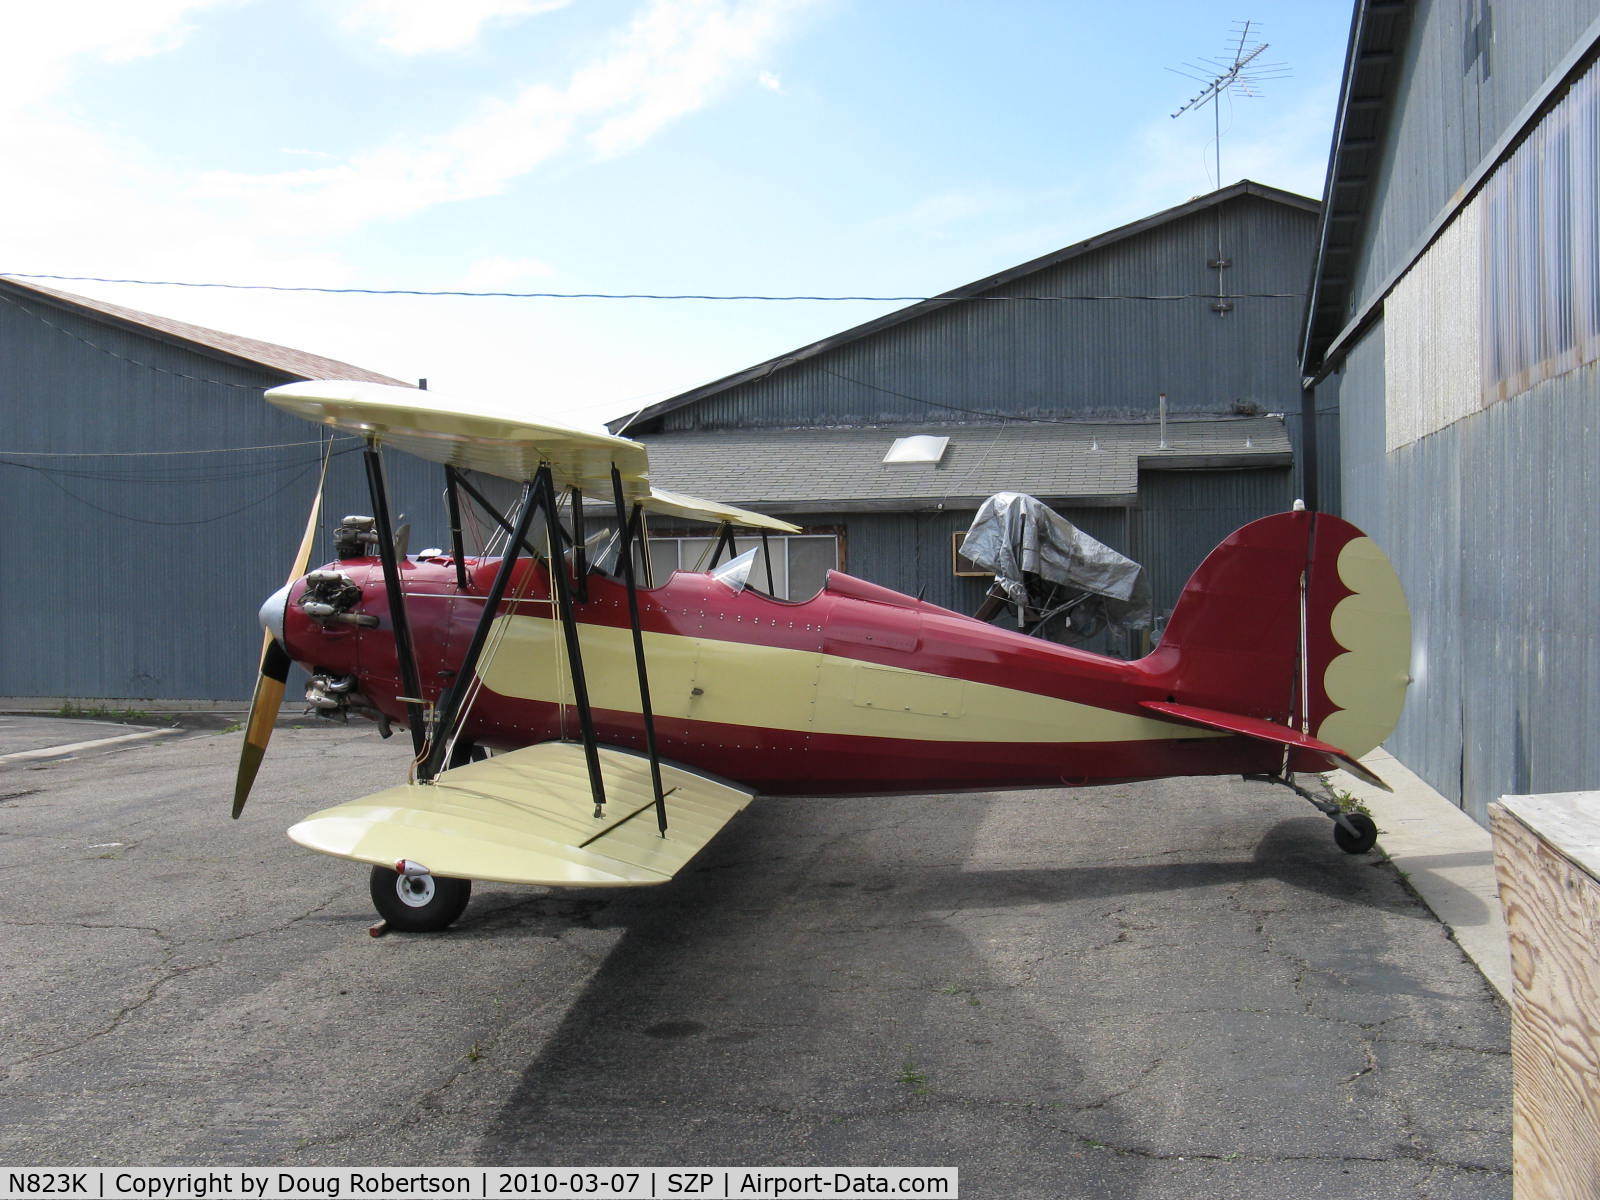 N823K, 1993 Great Lakes 2T-1A Sport Trainer C/N 1020, 1993 Ball GREAT LAKES 2T-1AK, Kinner R 56 5 cylinder radial 160 Hp, built by Al Ball, SZP's Kinner expert A&P